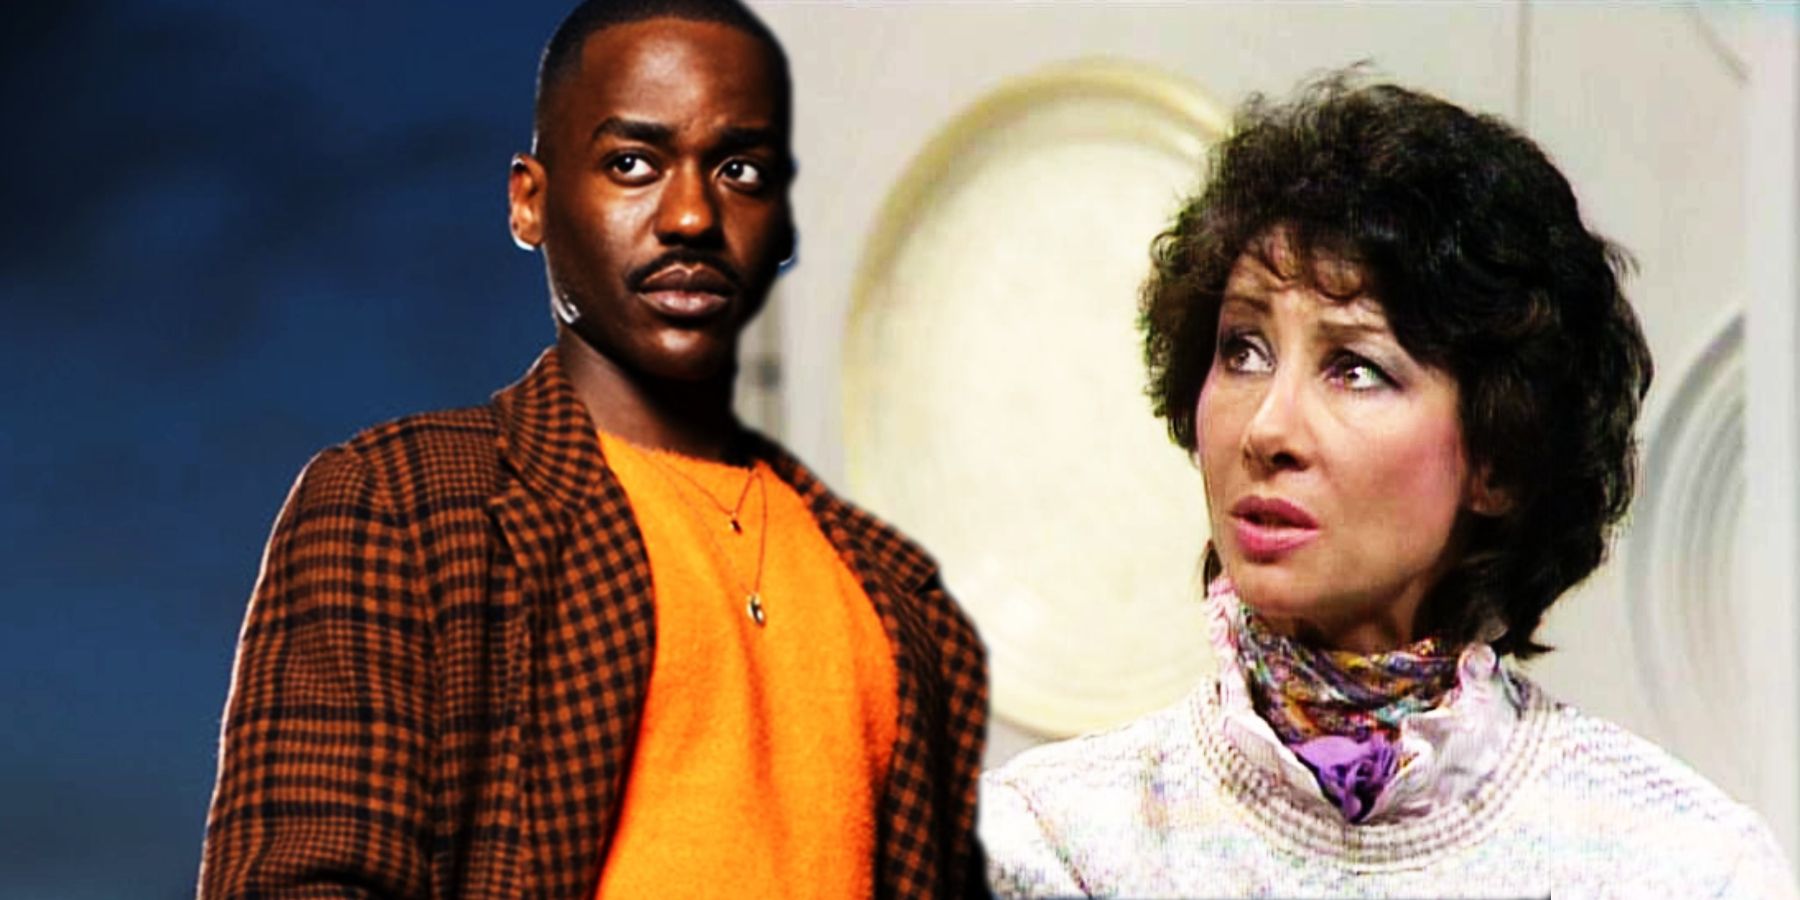 Ncuti Gatwa as the Doctor and Carole Ann Ford as Susan Foreman